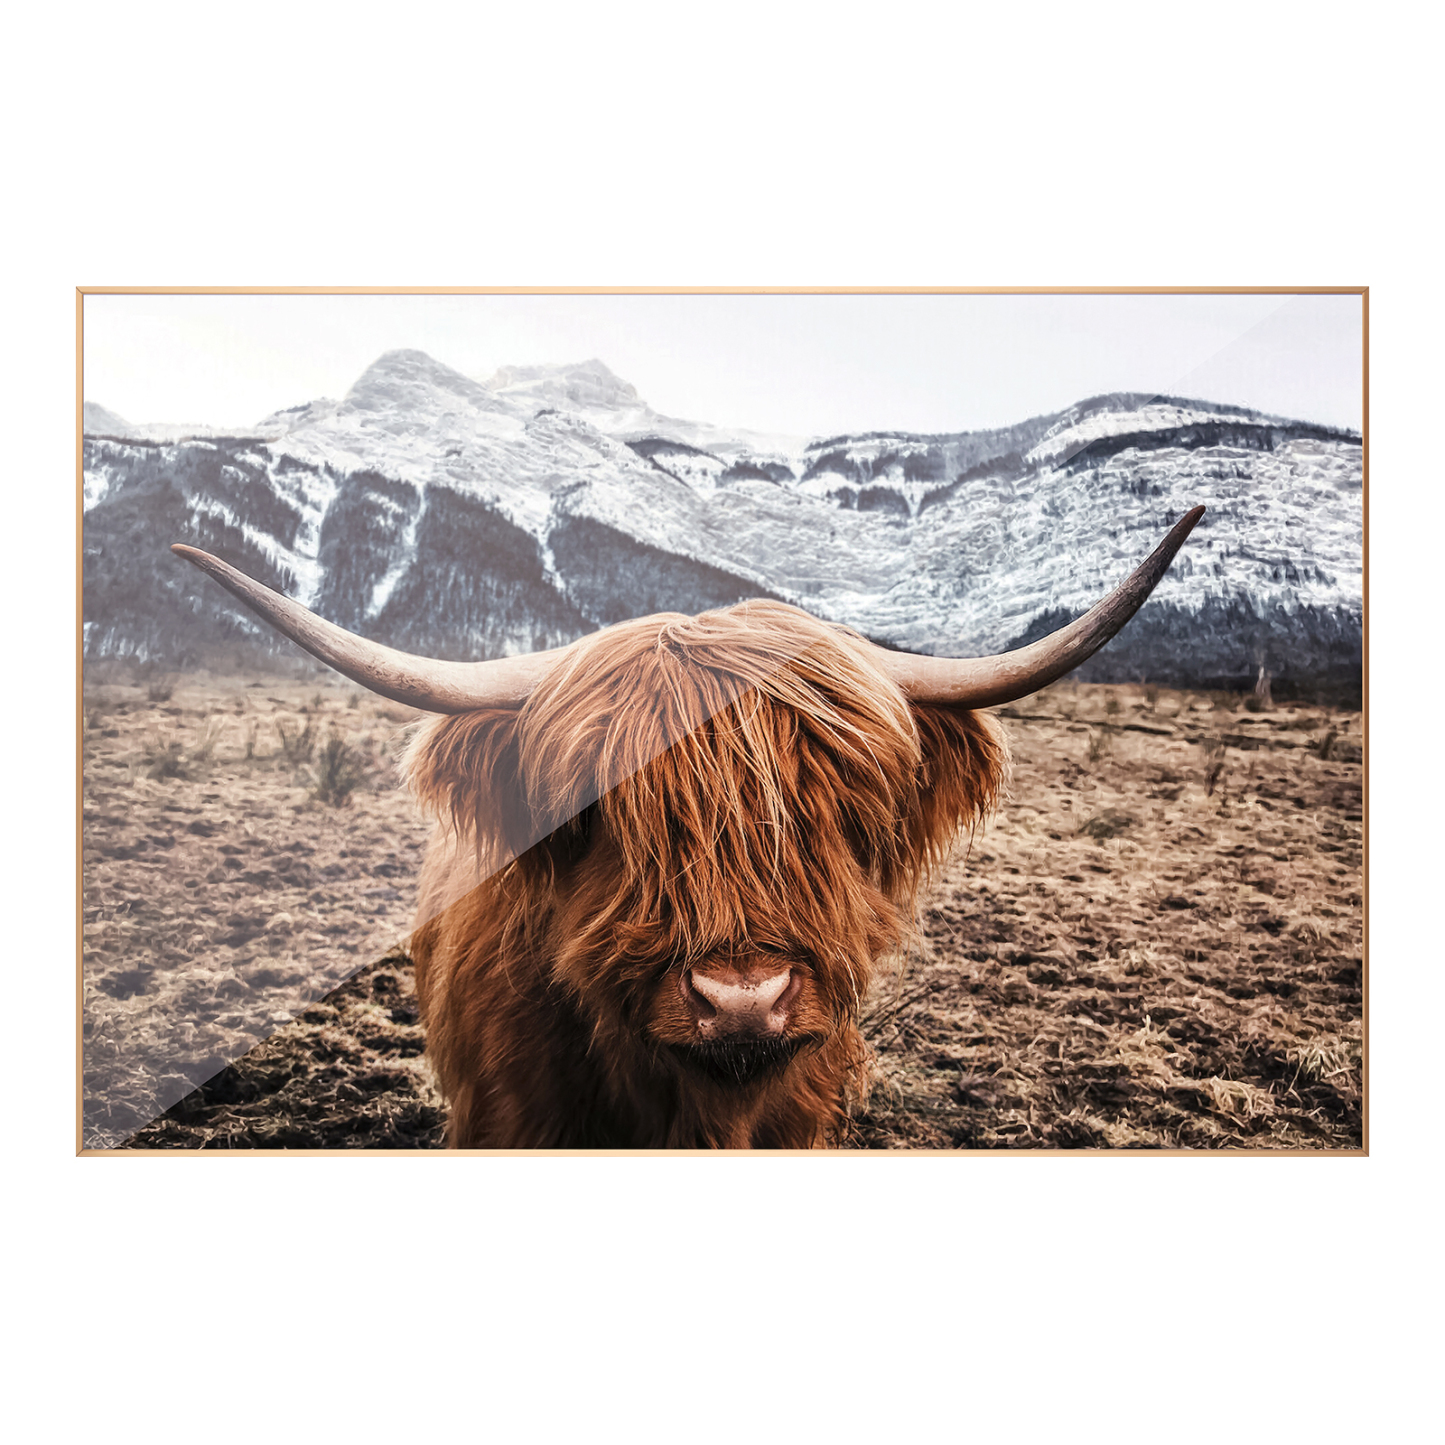 900x600mm Scottish Highland Cattle Cow Wall Art Lifestyle Canvas Print Home Decor